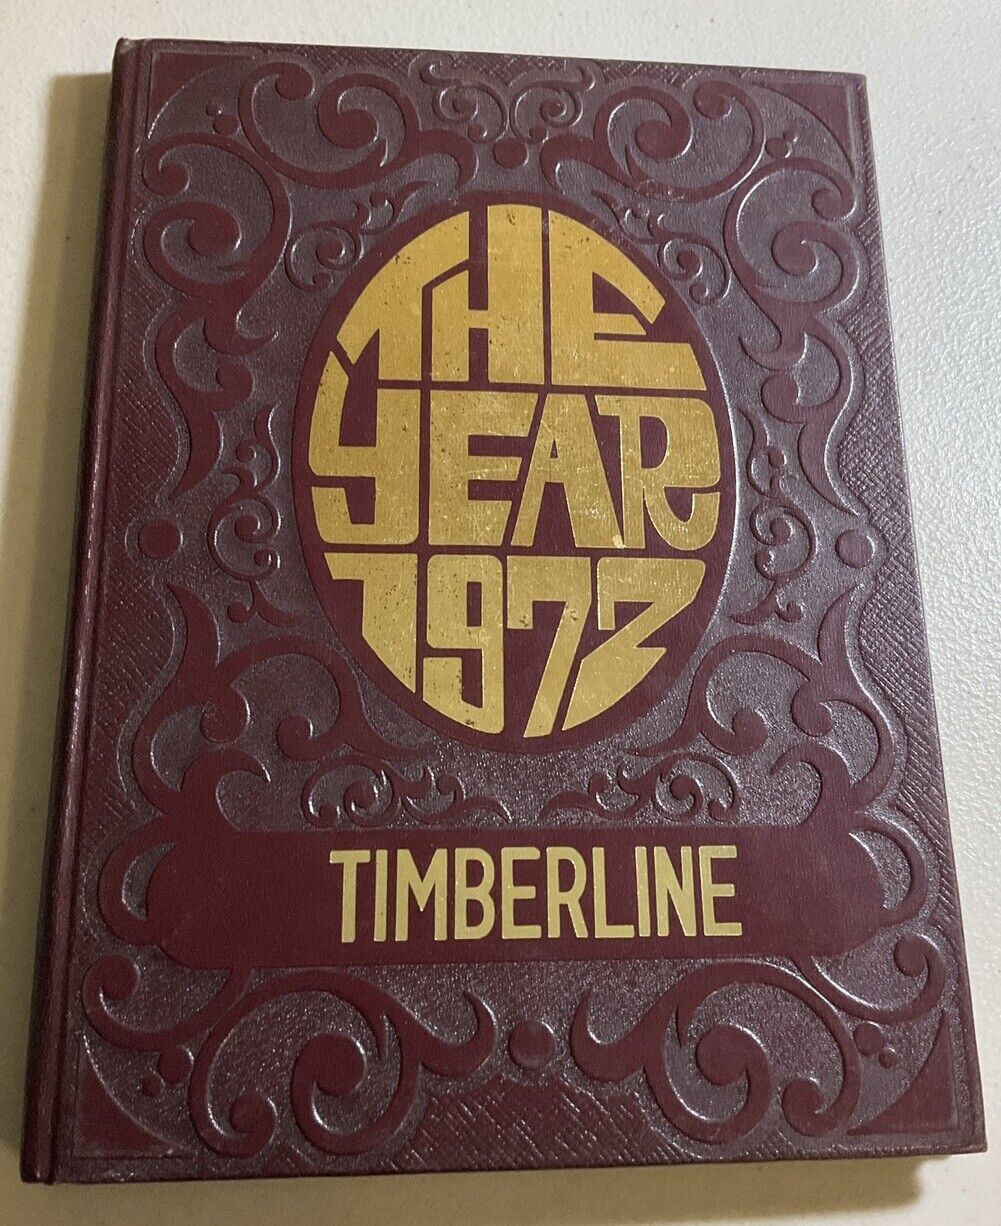 The Year 1972 Timberline - Hardcover - GOOD